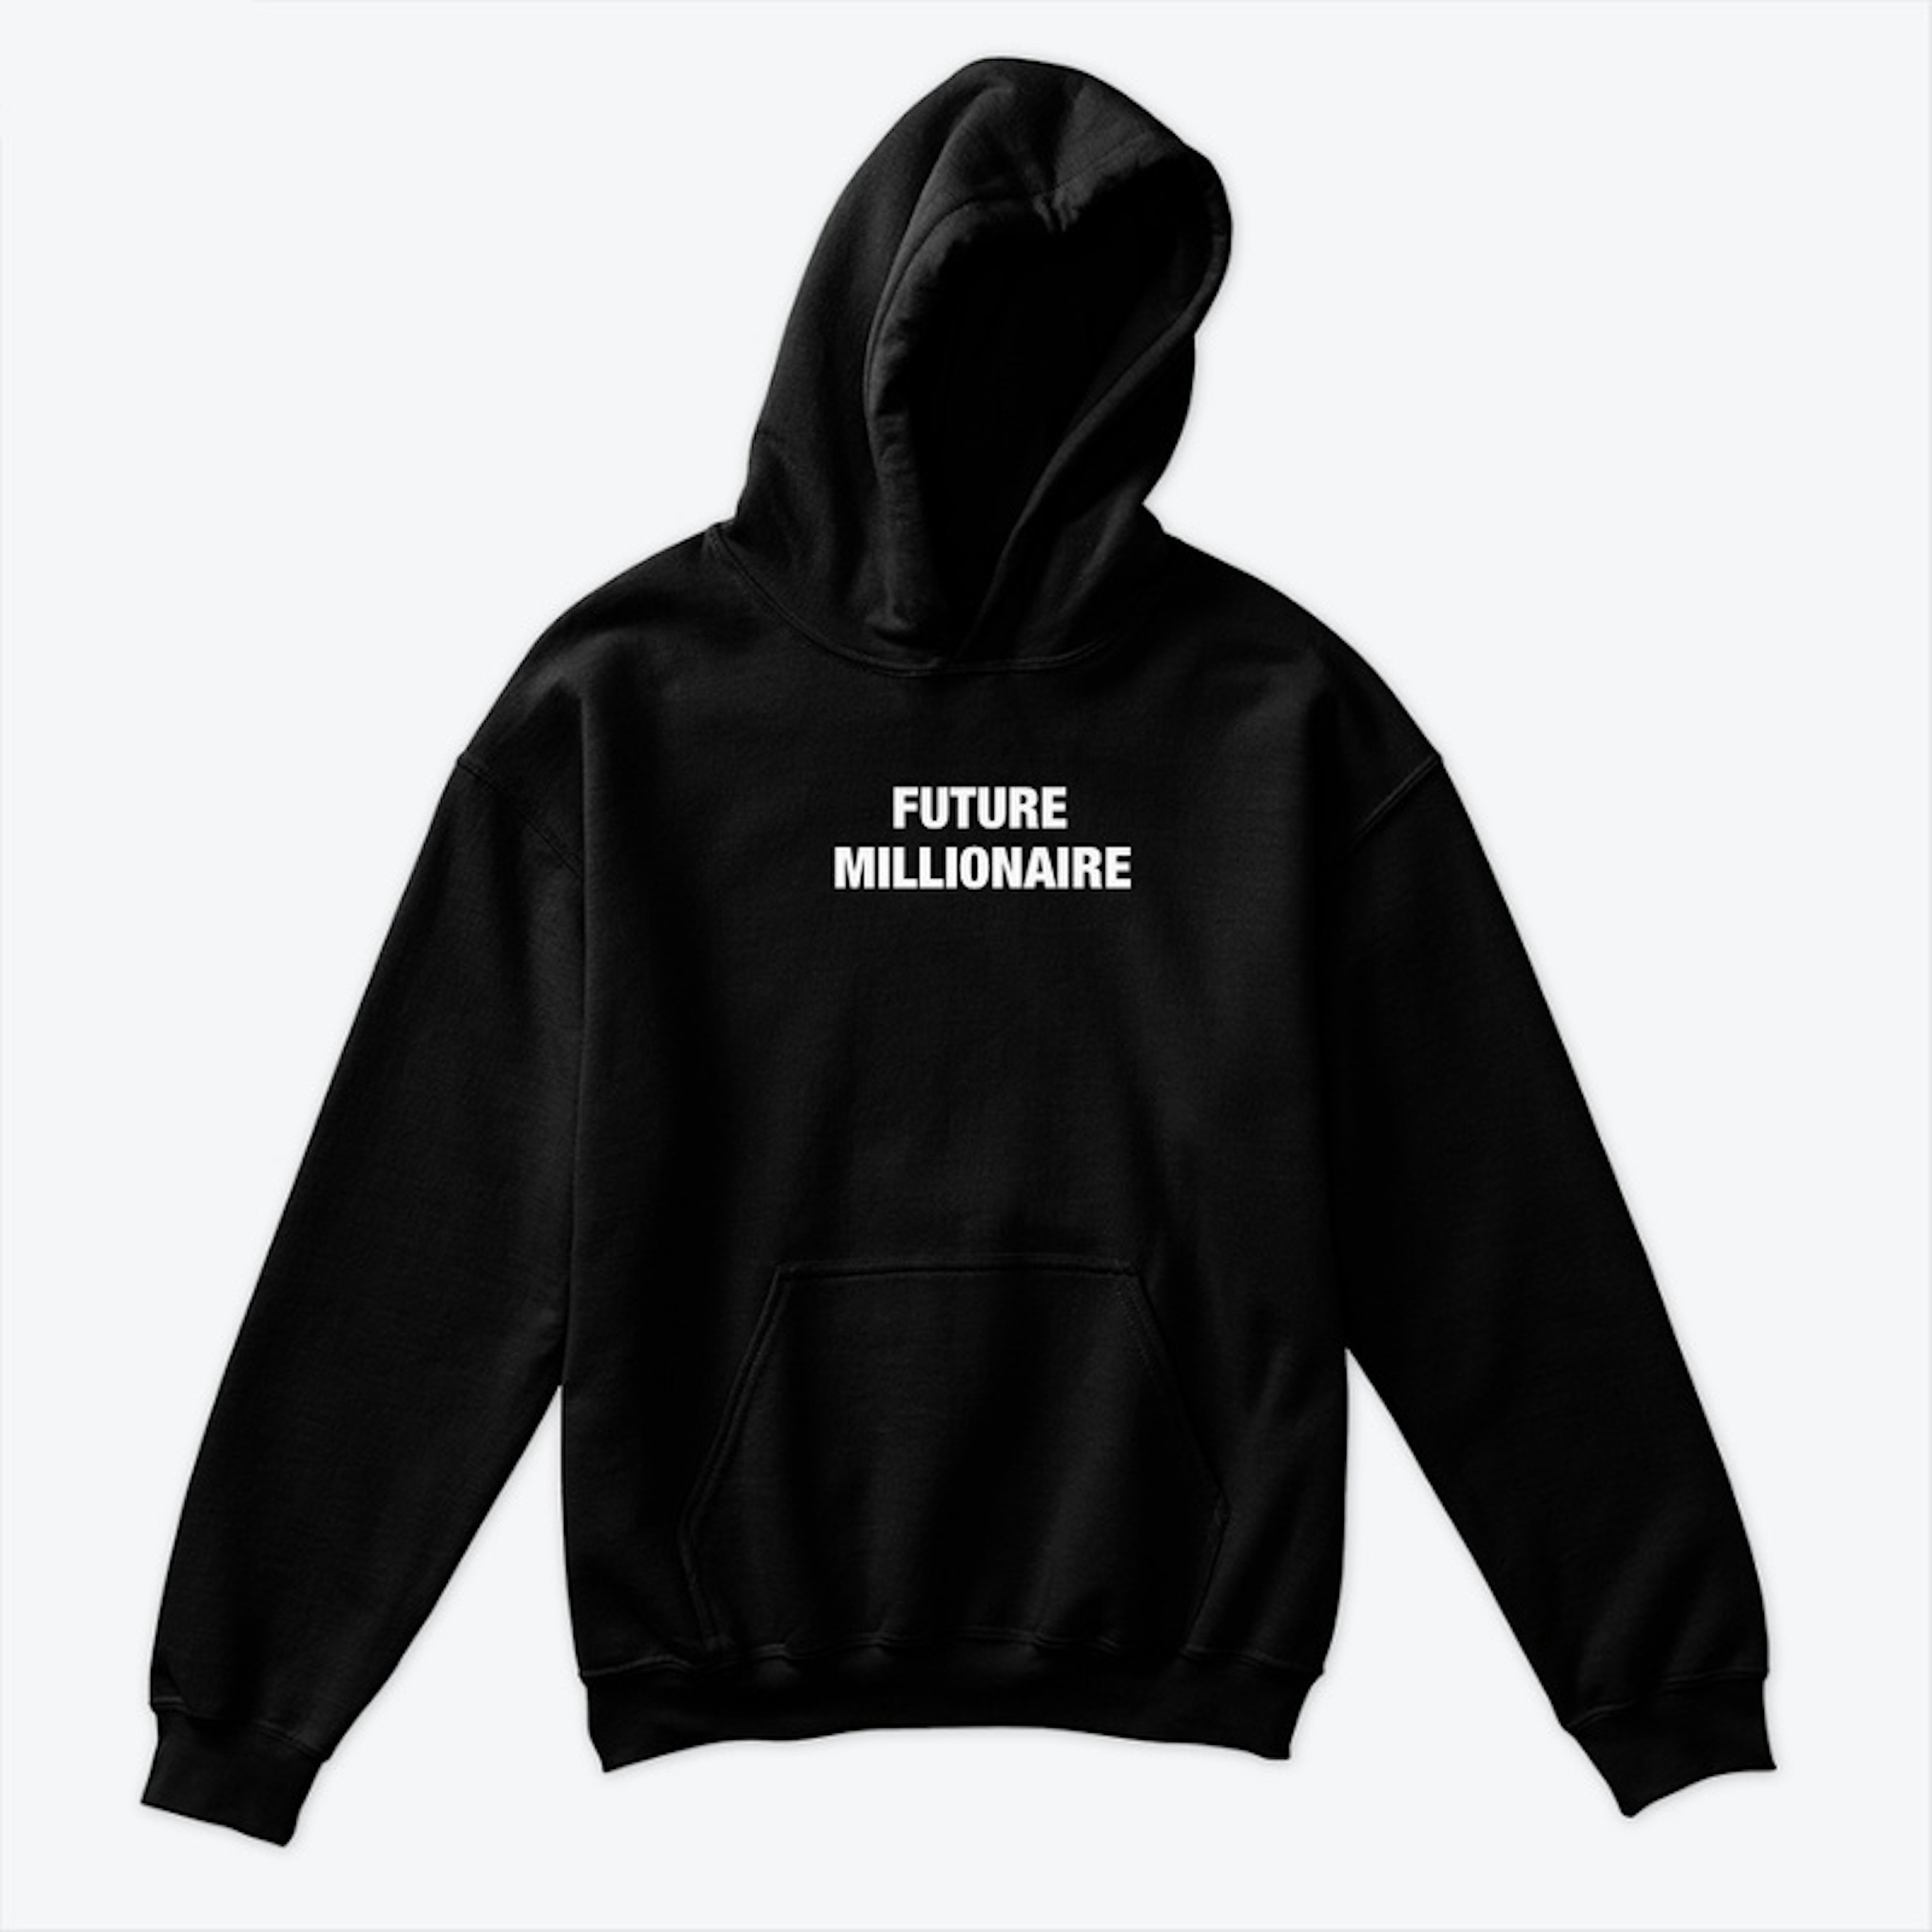 FUTURE MILLIONAIRE YOUTH COLLECTION